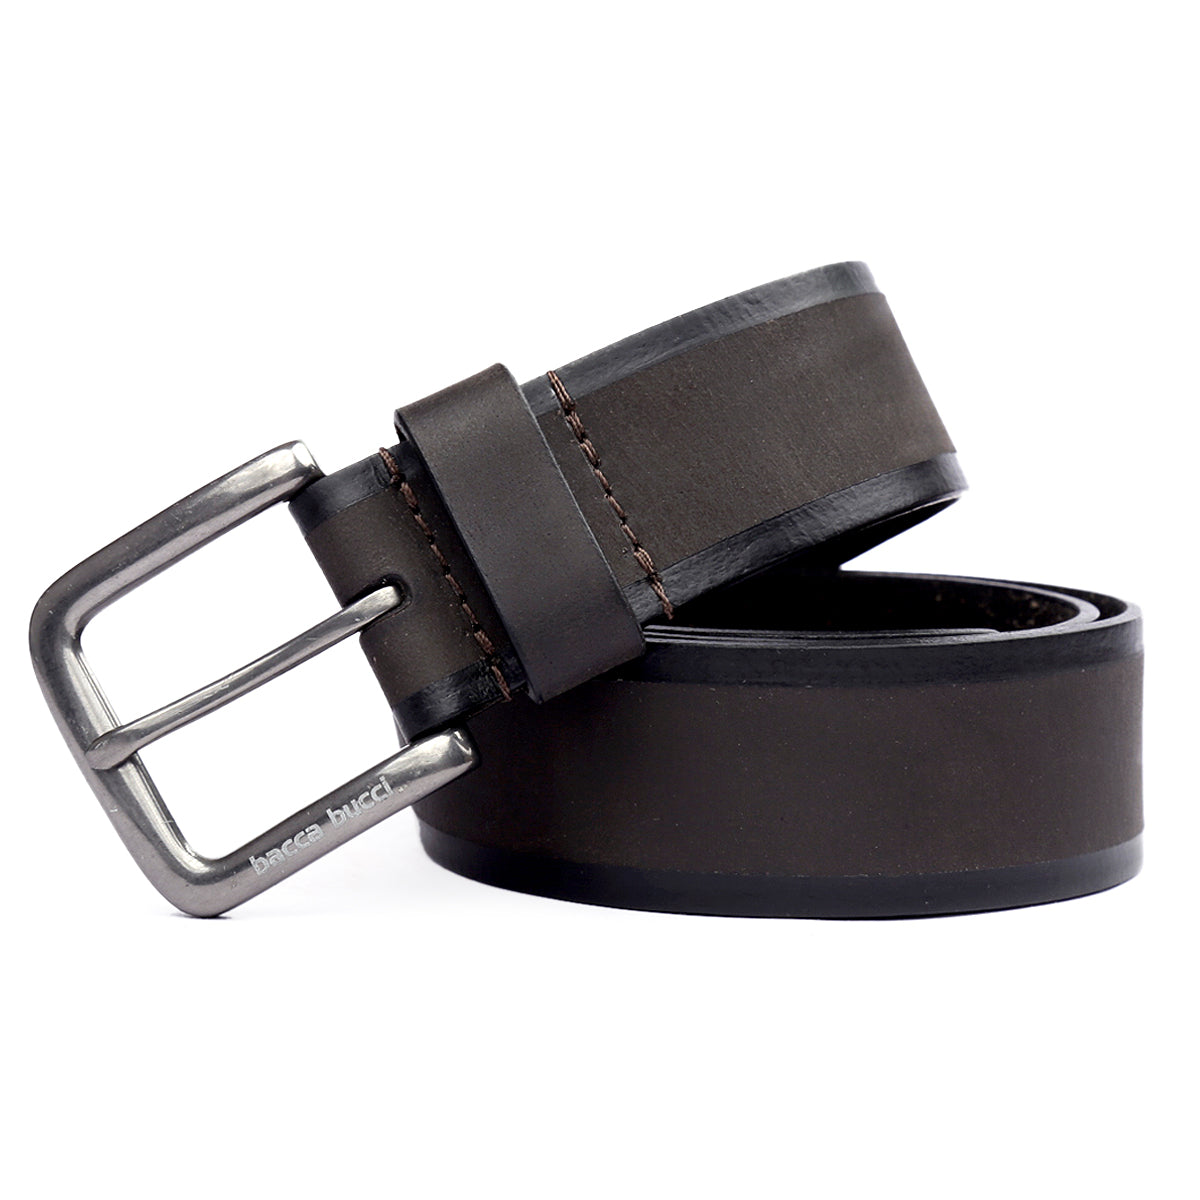 Bacca Bucci Men's Casual Genuine Leather Jeans Belt 40 MM Wide 4 MM Thick Alloy Prong Buckle for Casual wear-Dark Grey